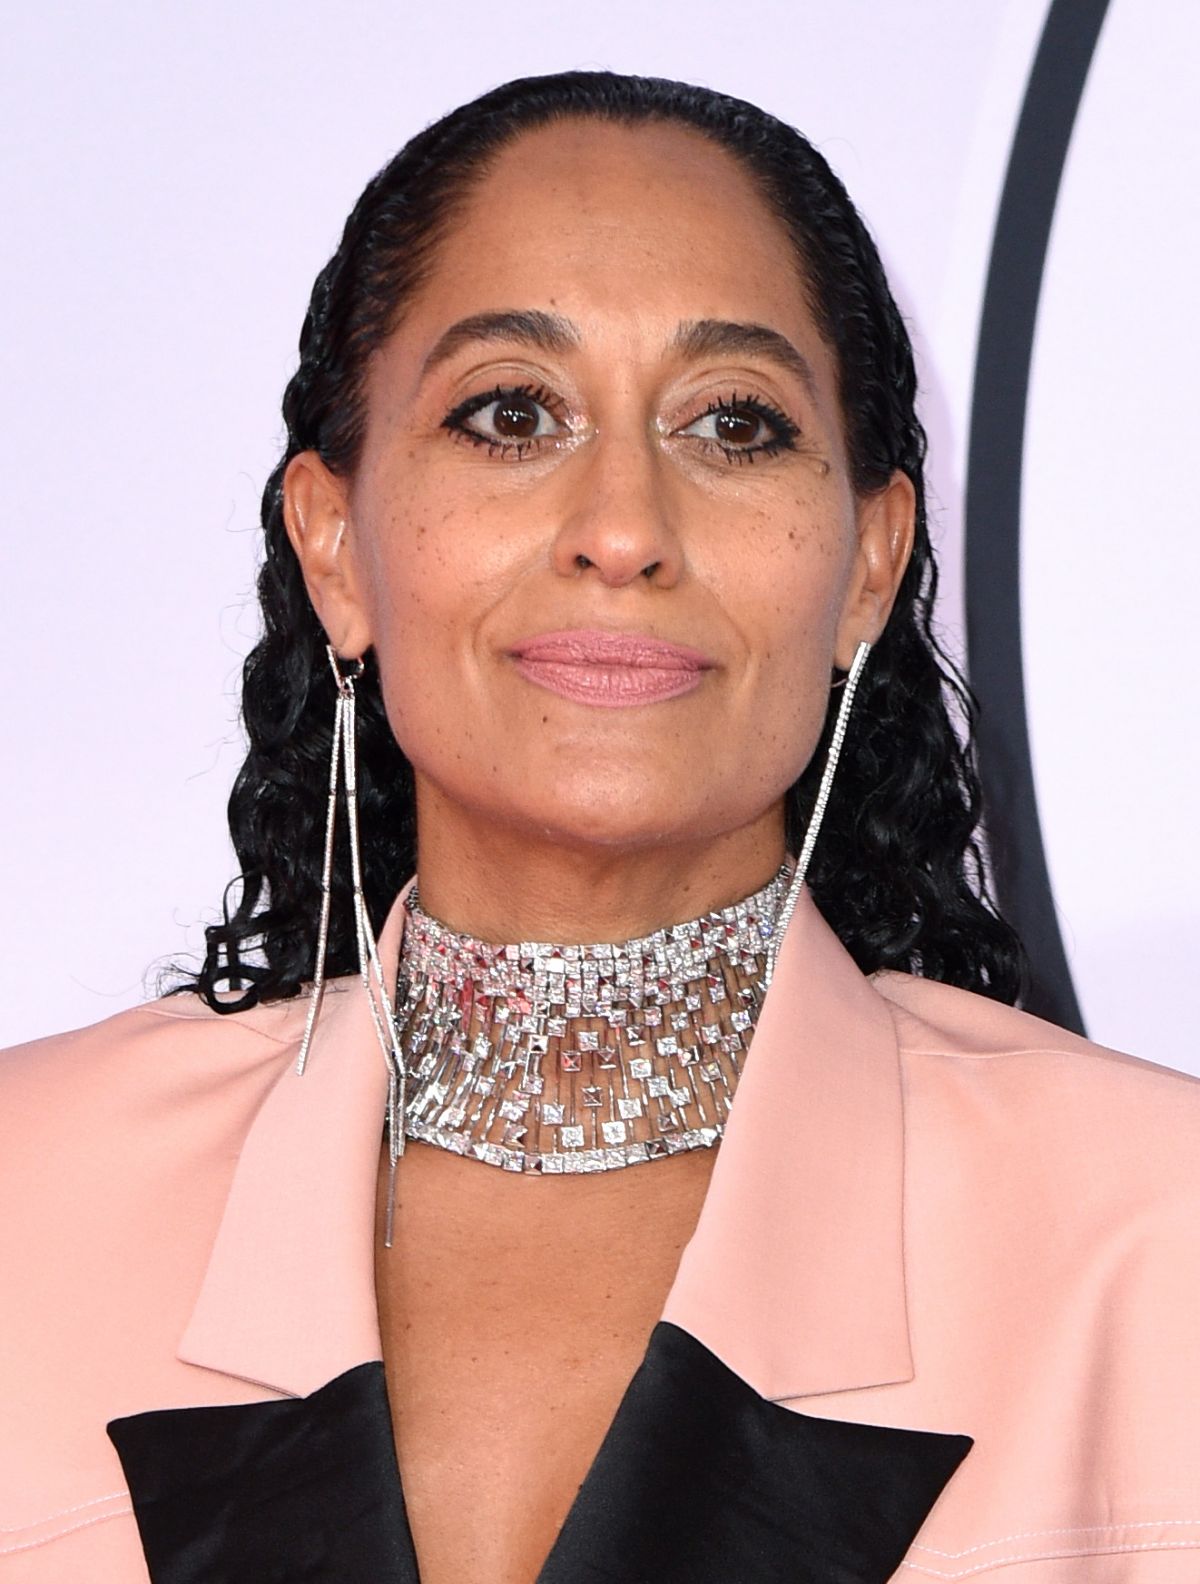 TRACEE ELLIS ROSS at American Music Awards in Los Angeles 10/09/2018 ...